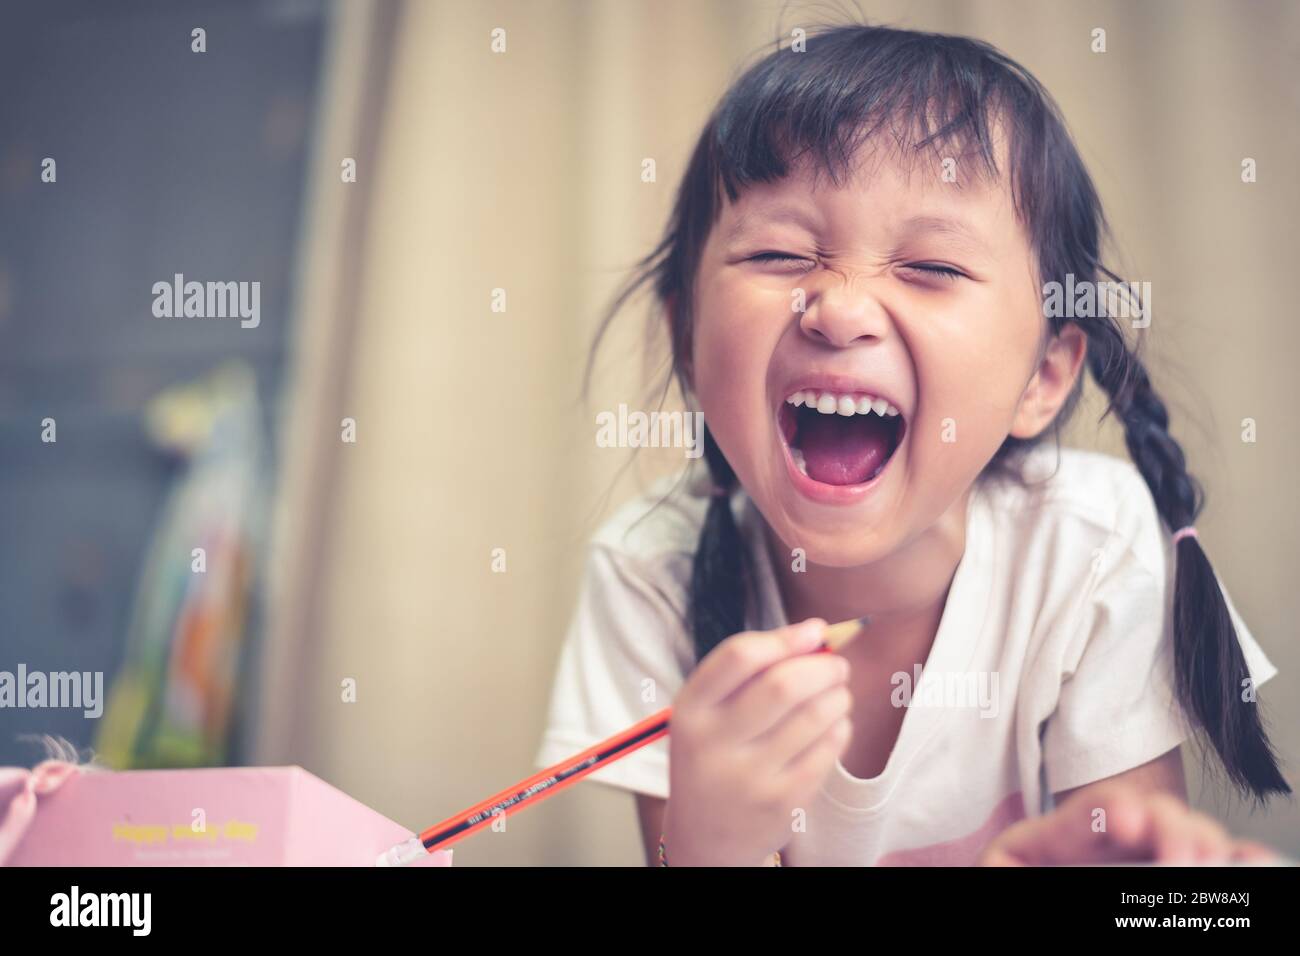 Asian girl doing homework her screaming crazy and mad shouting and yelling with aggressive expression in home the feeling of being upset because of Stock Photo